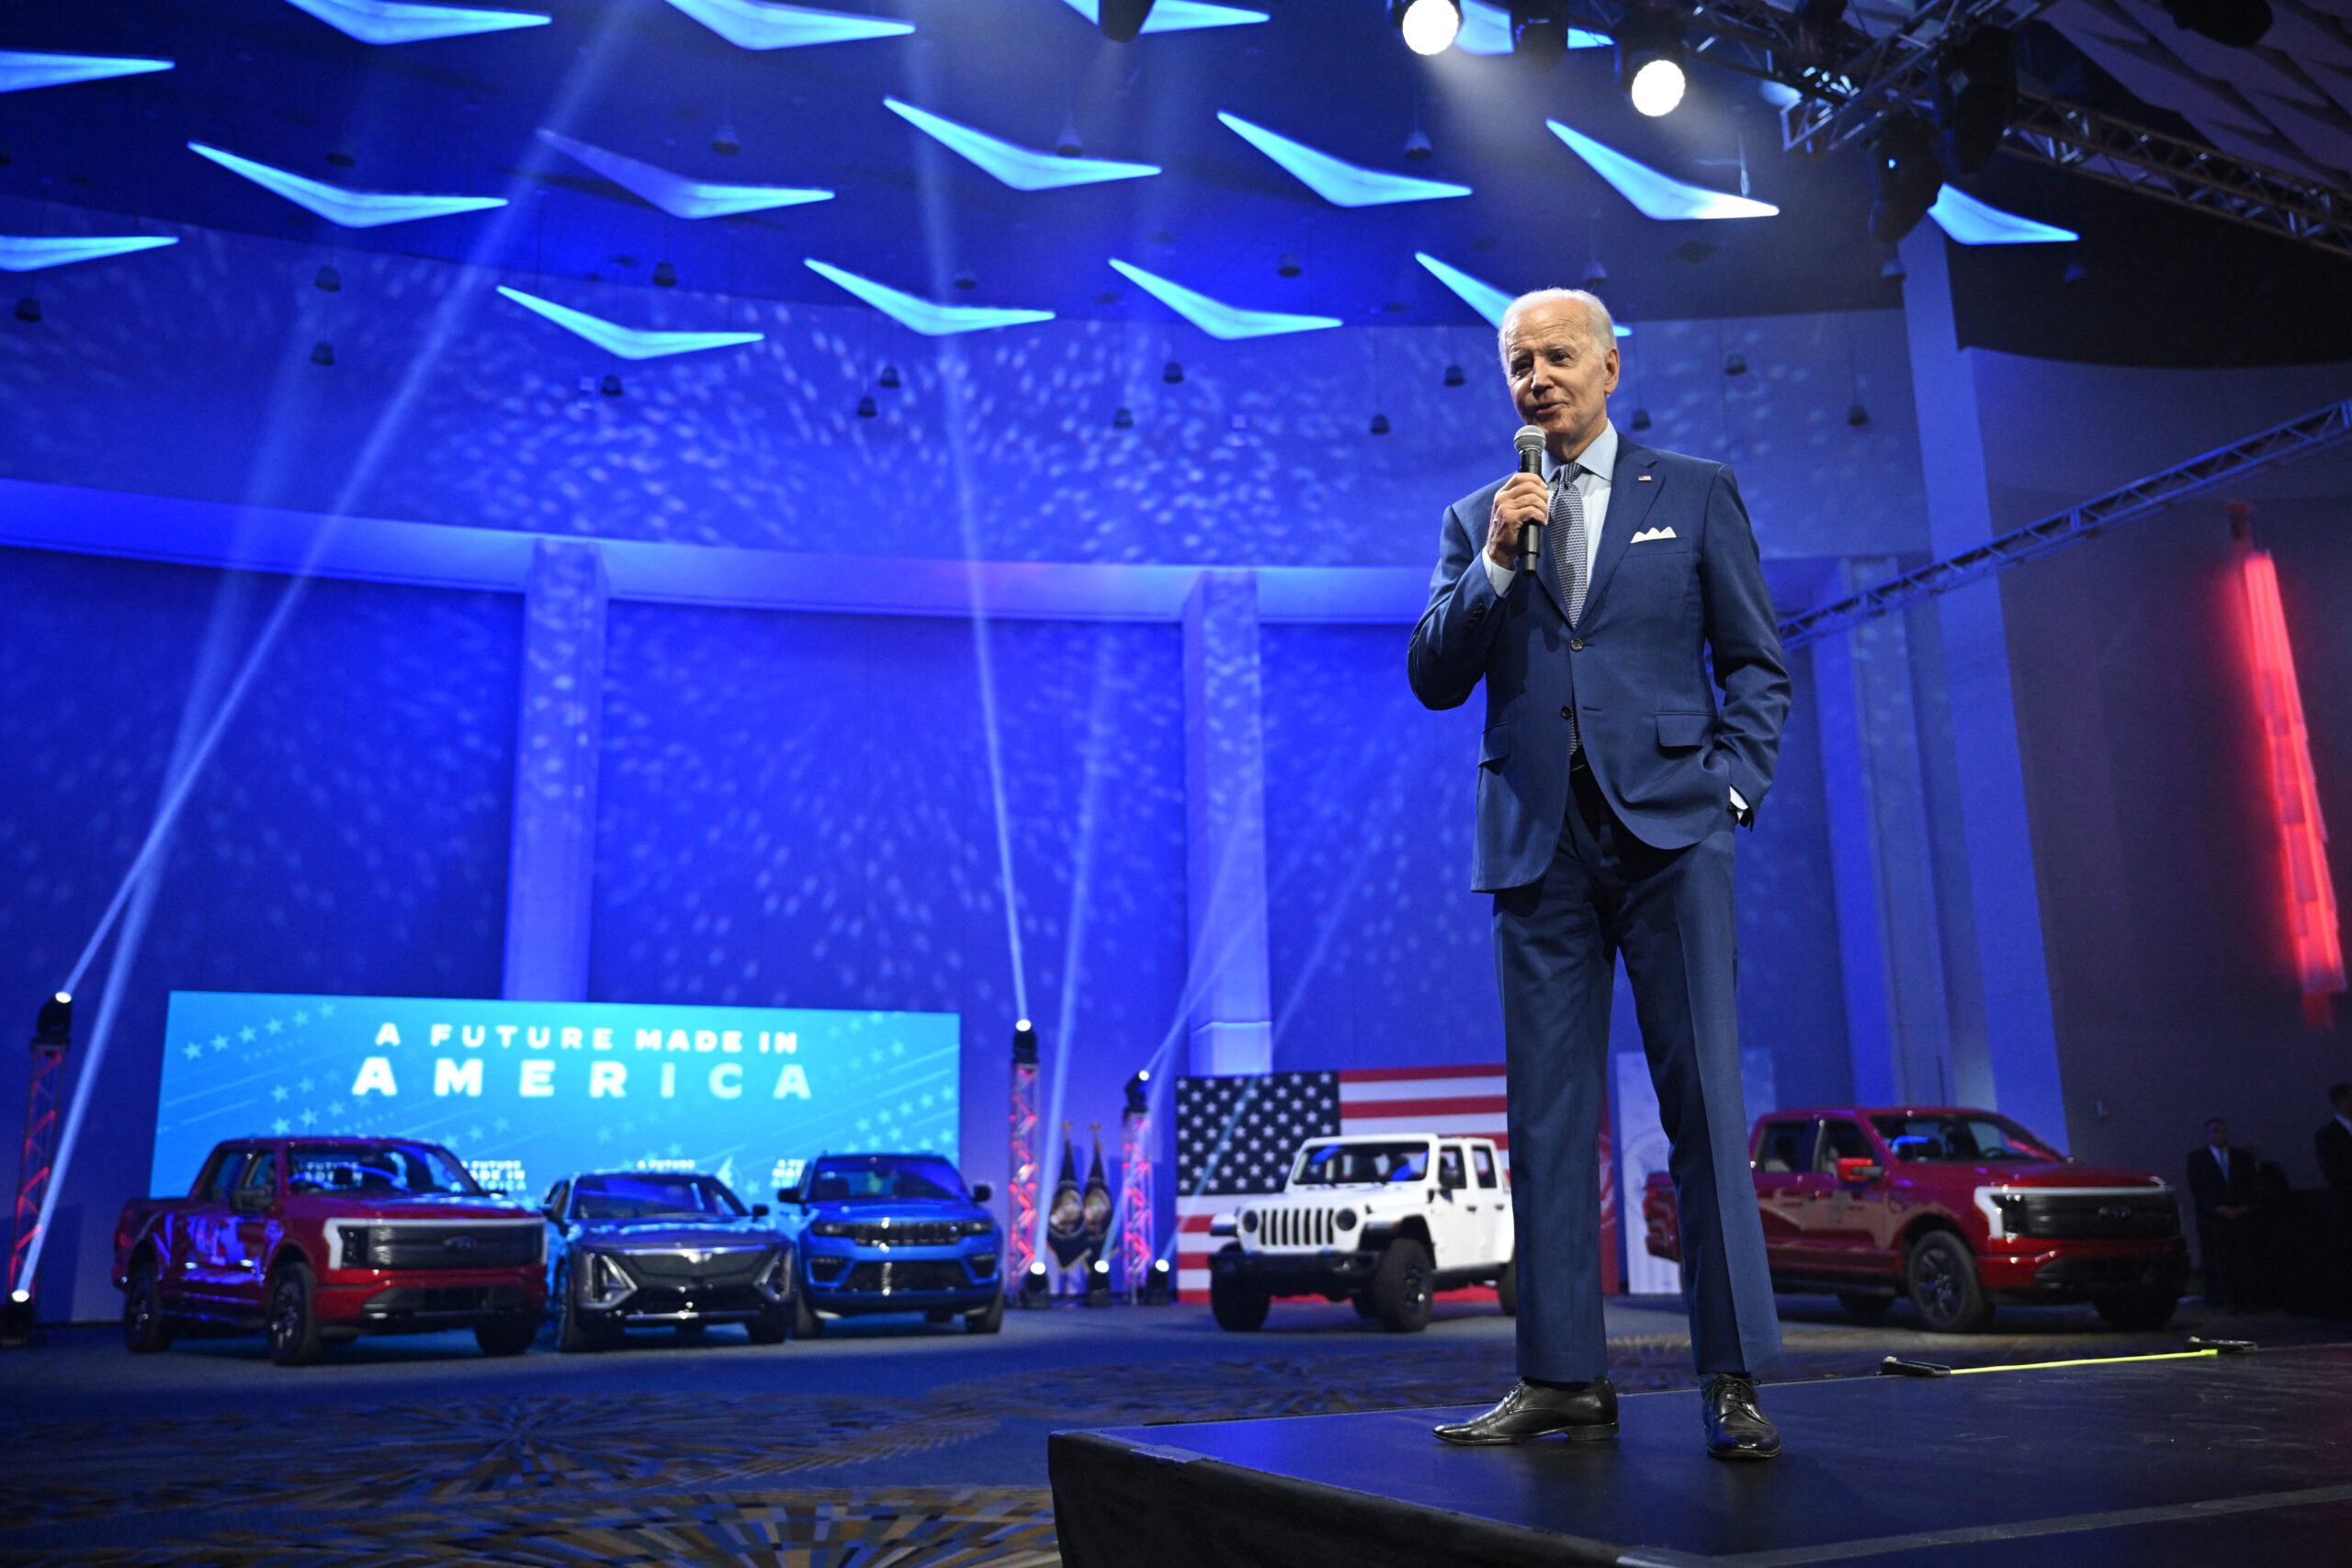 Old white man in blue suit speaks into a microphone. In the background is a display lined with electric vehicles in red, white, and blue variations